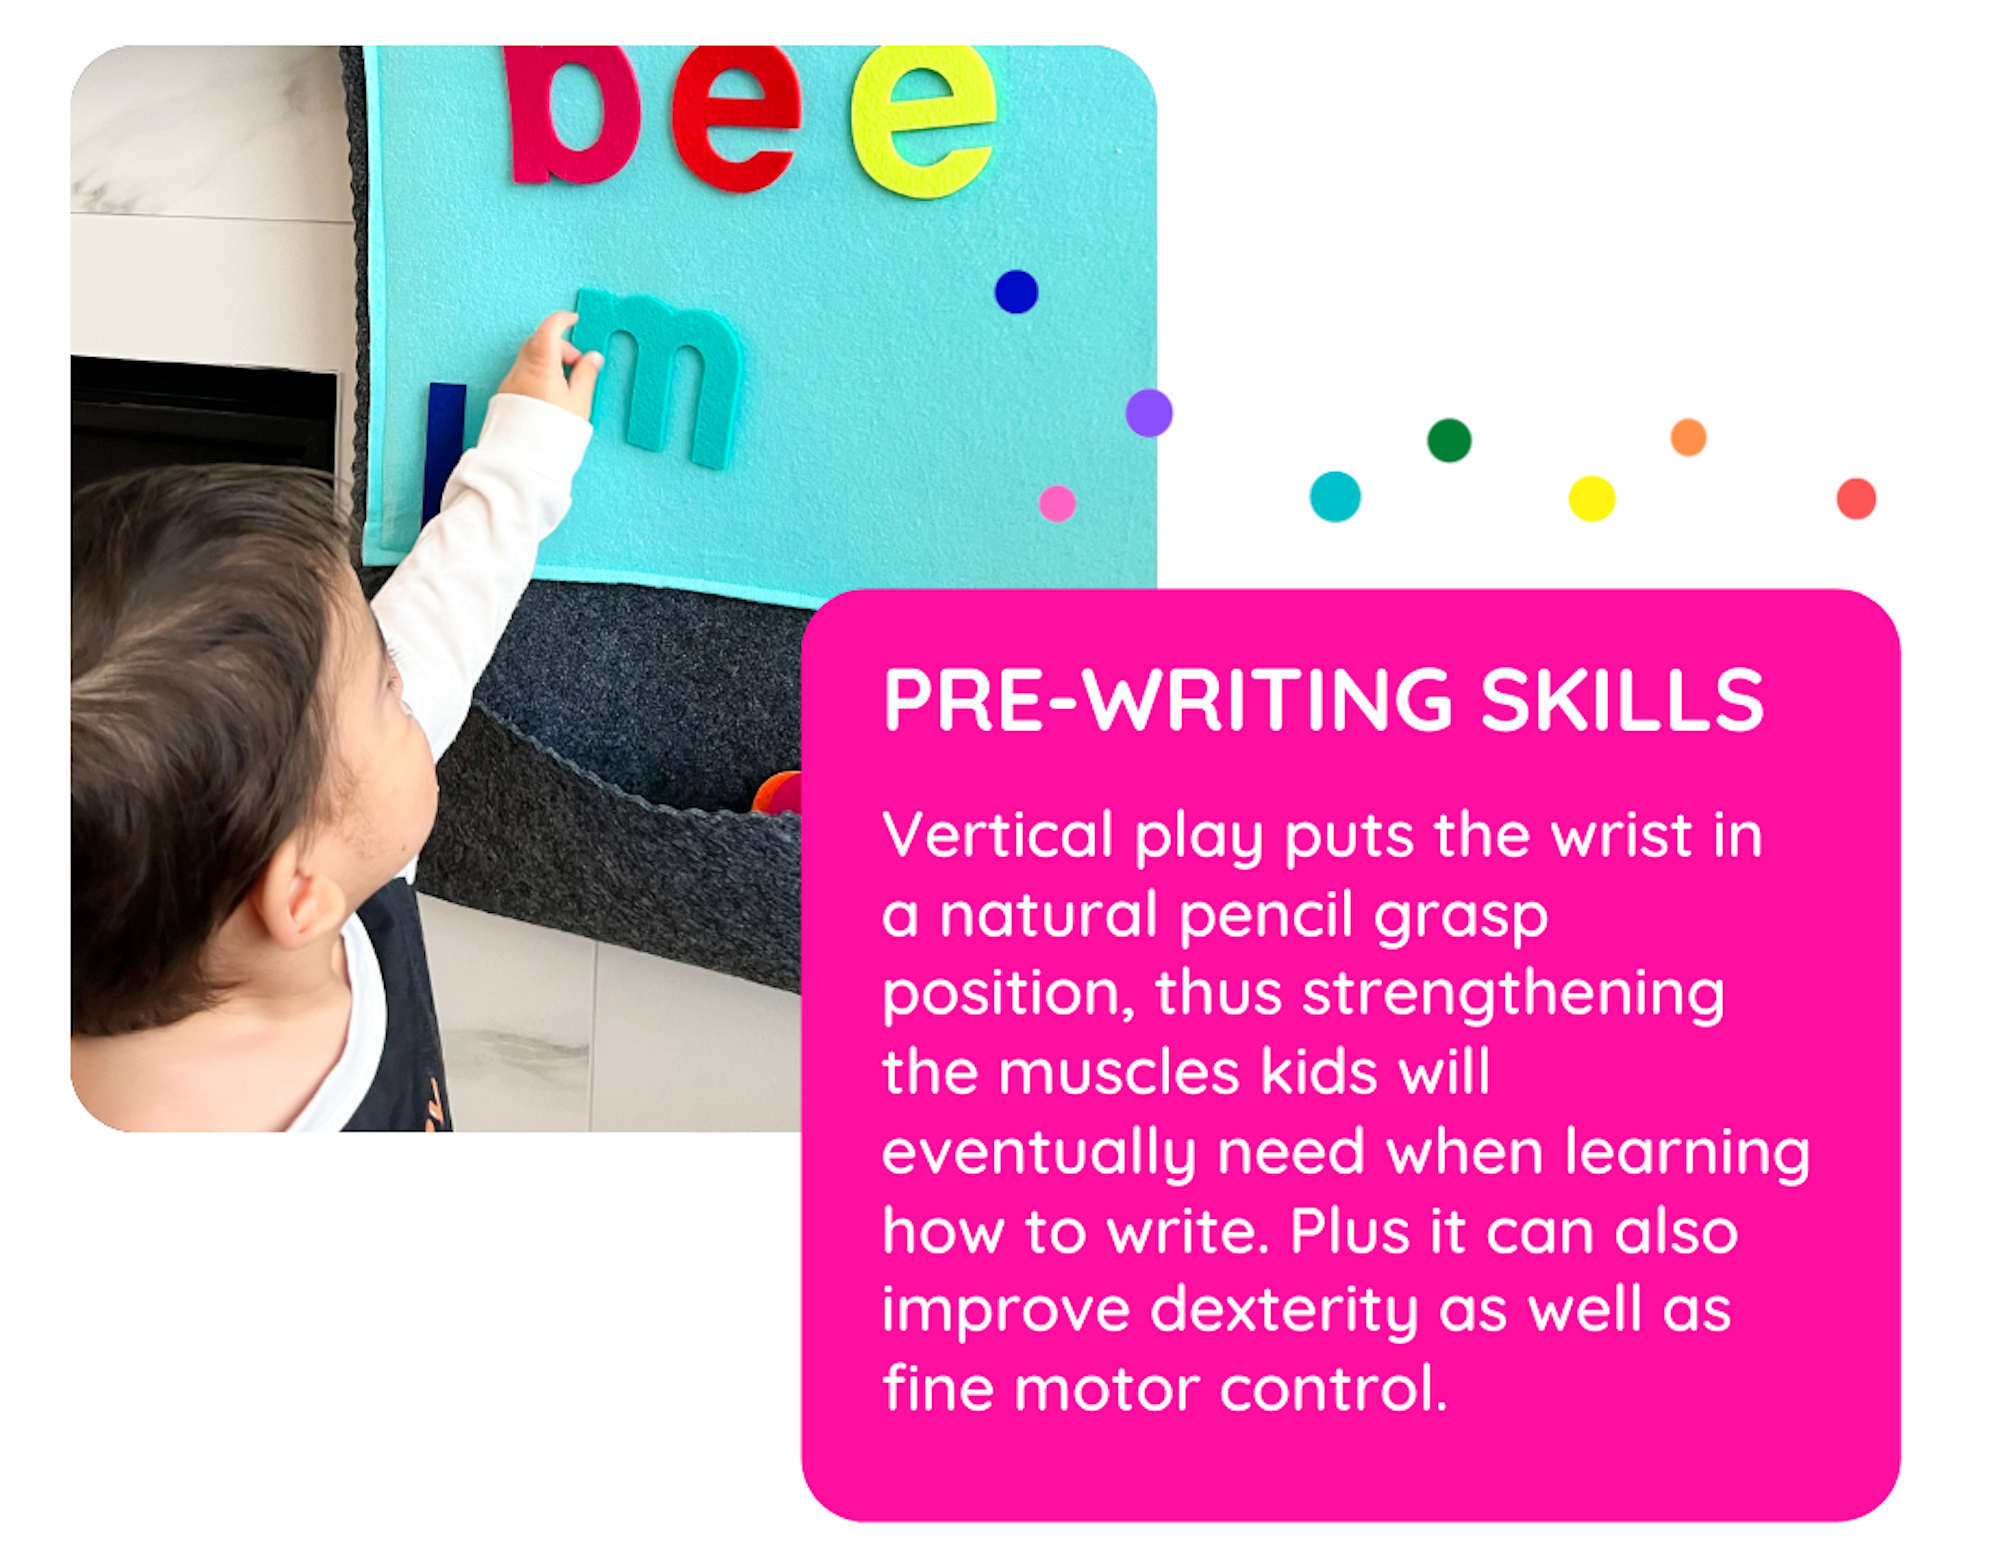 pre writing skills can be developed through vertical play